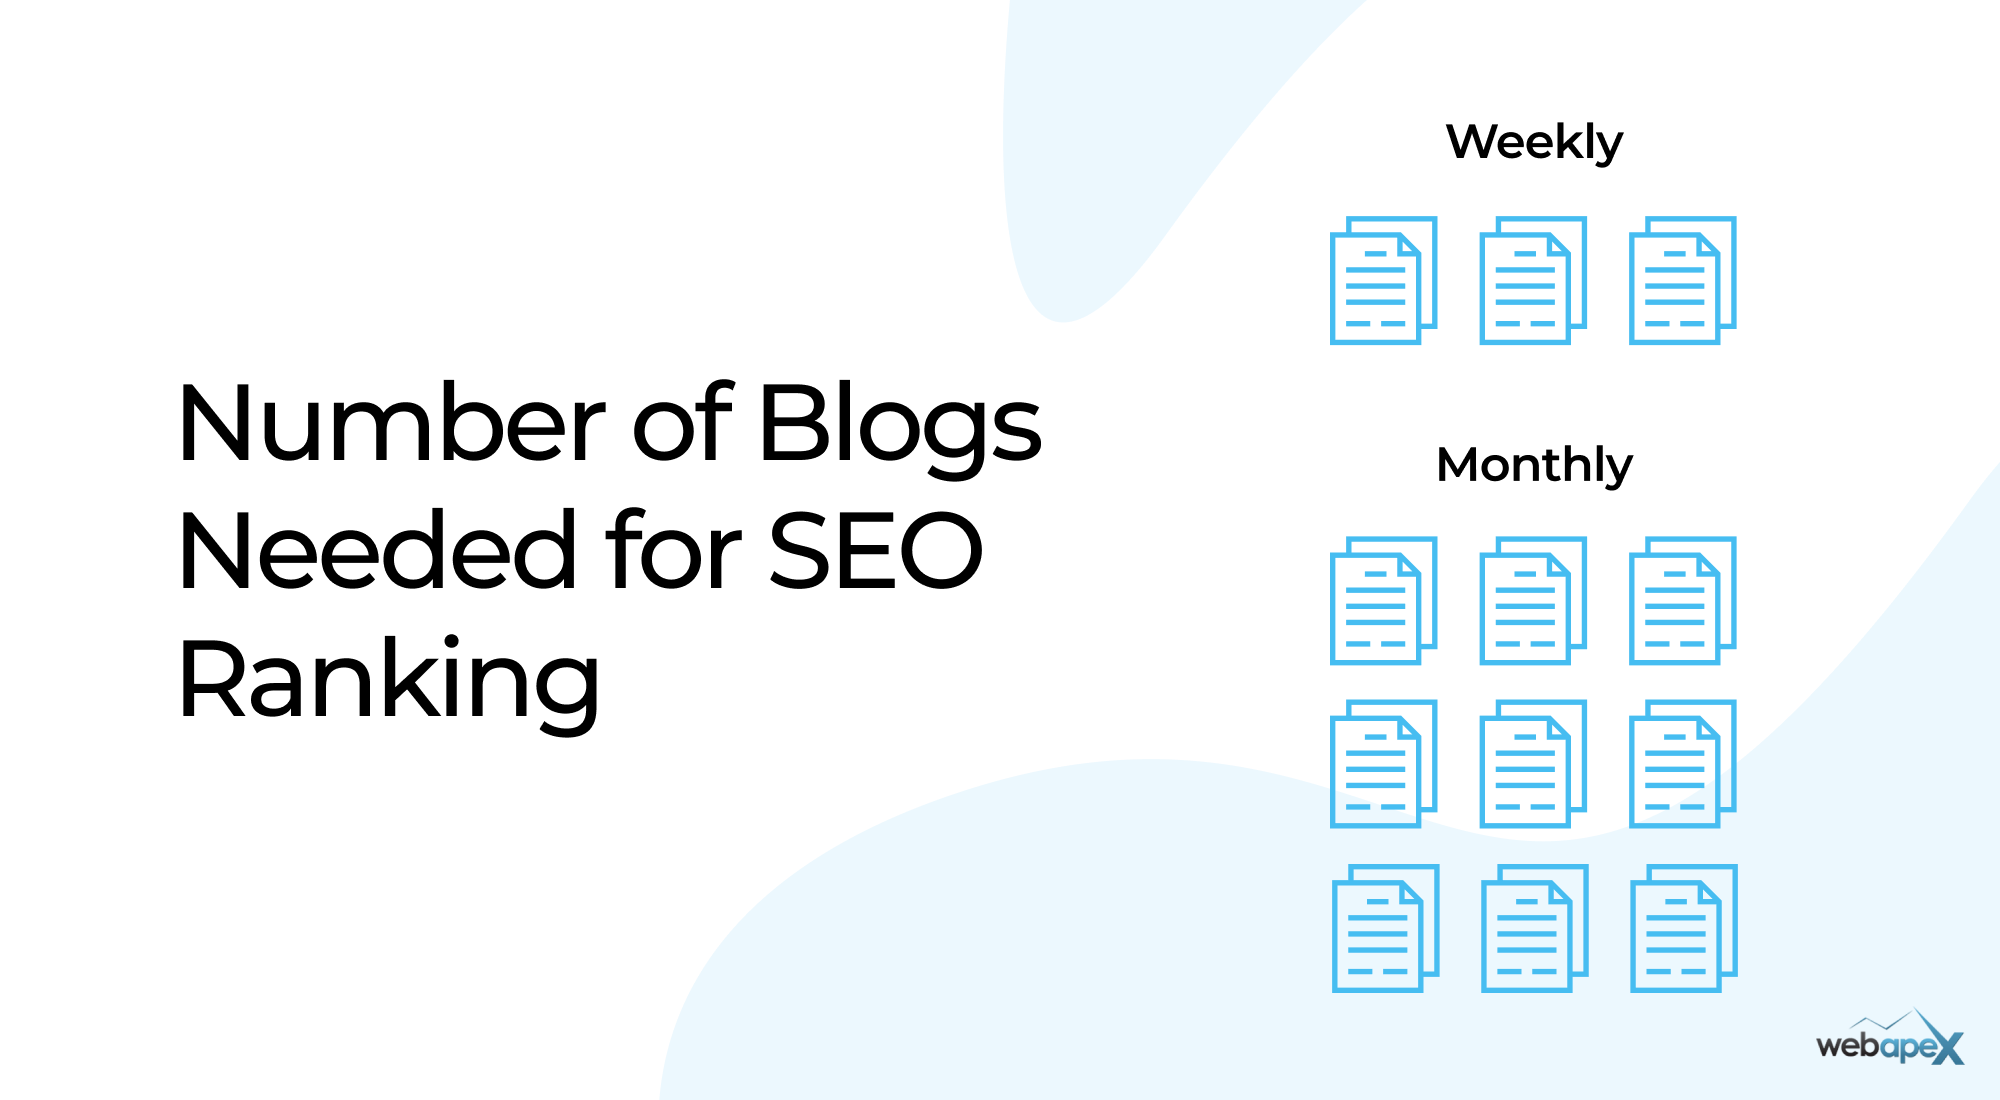 How many blogs needed for SEO ranking?